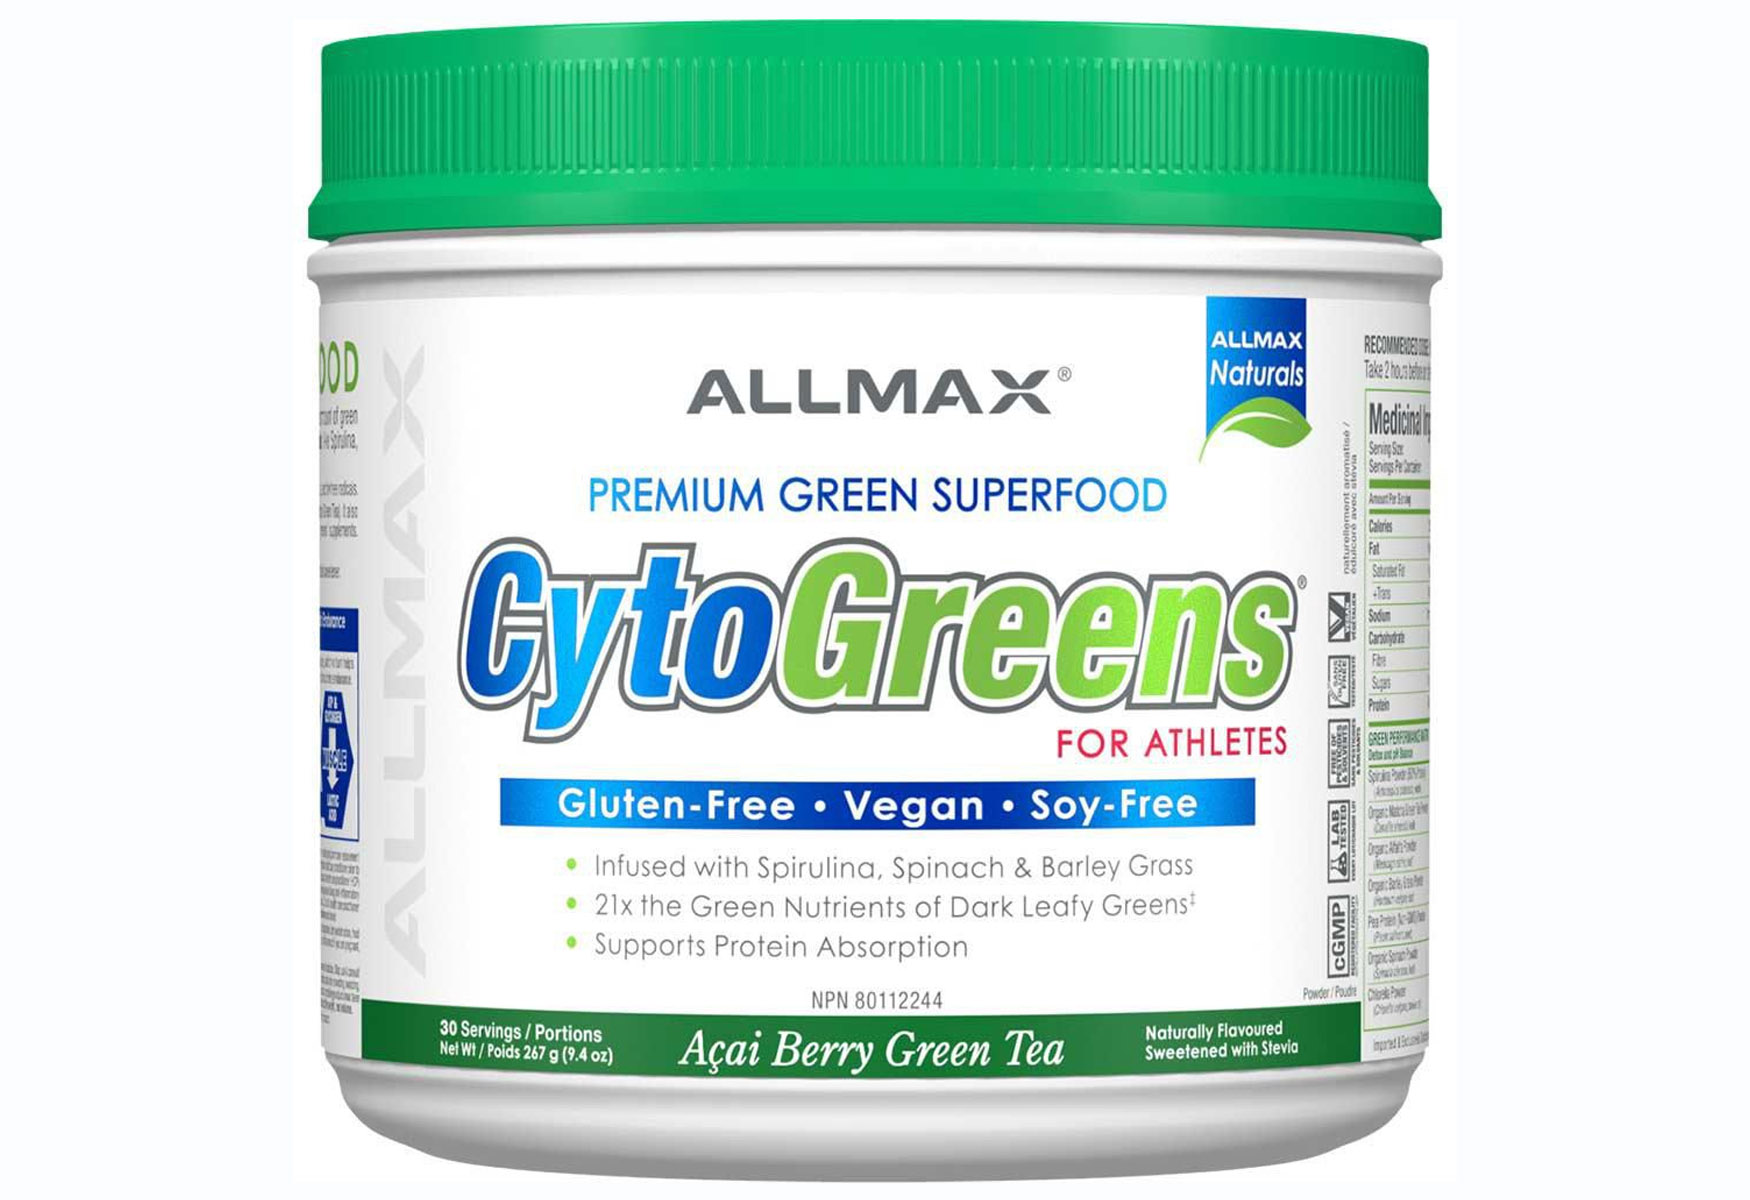 19-cyto-greens-nutrition-facts